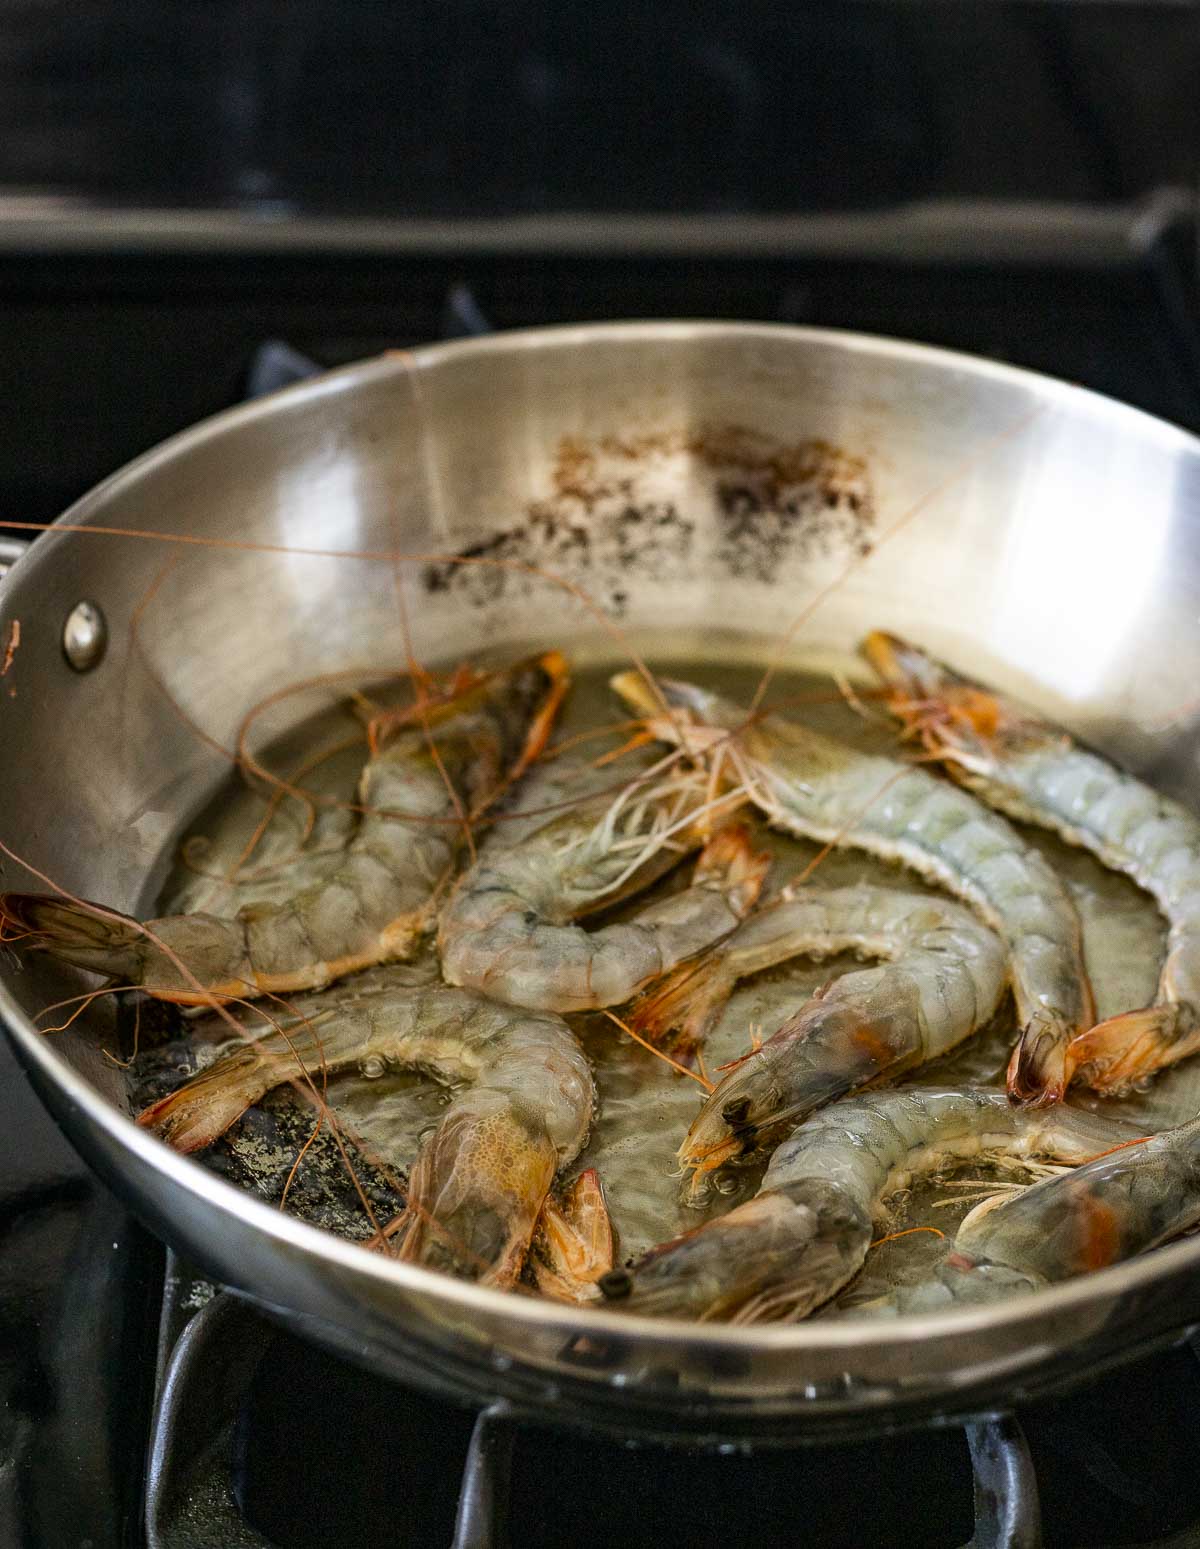 Prawns cooking in oil in a skillet on the stovetop.